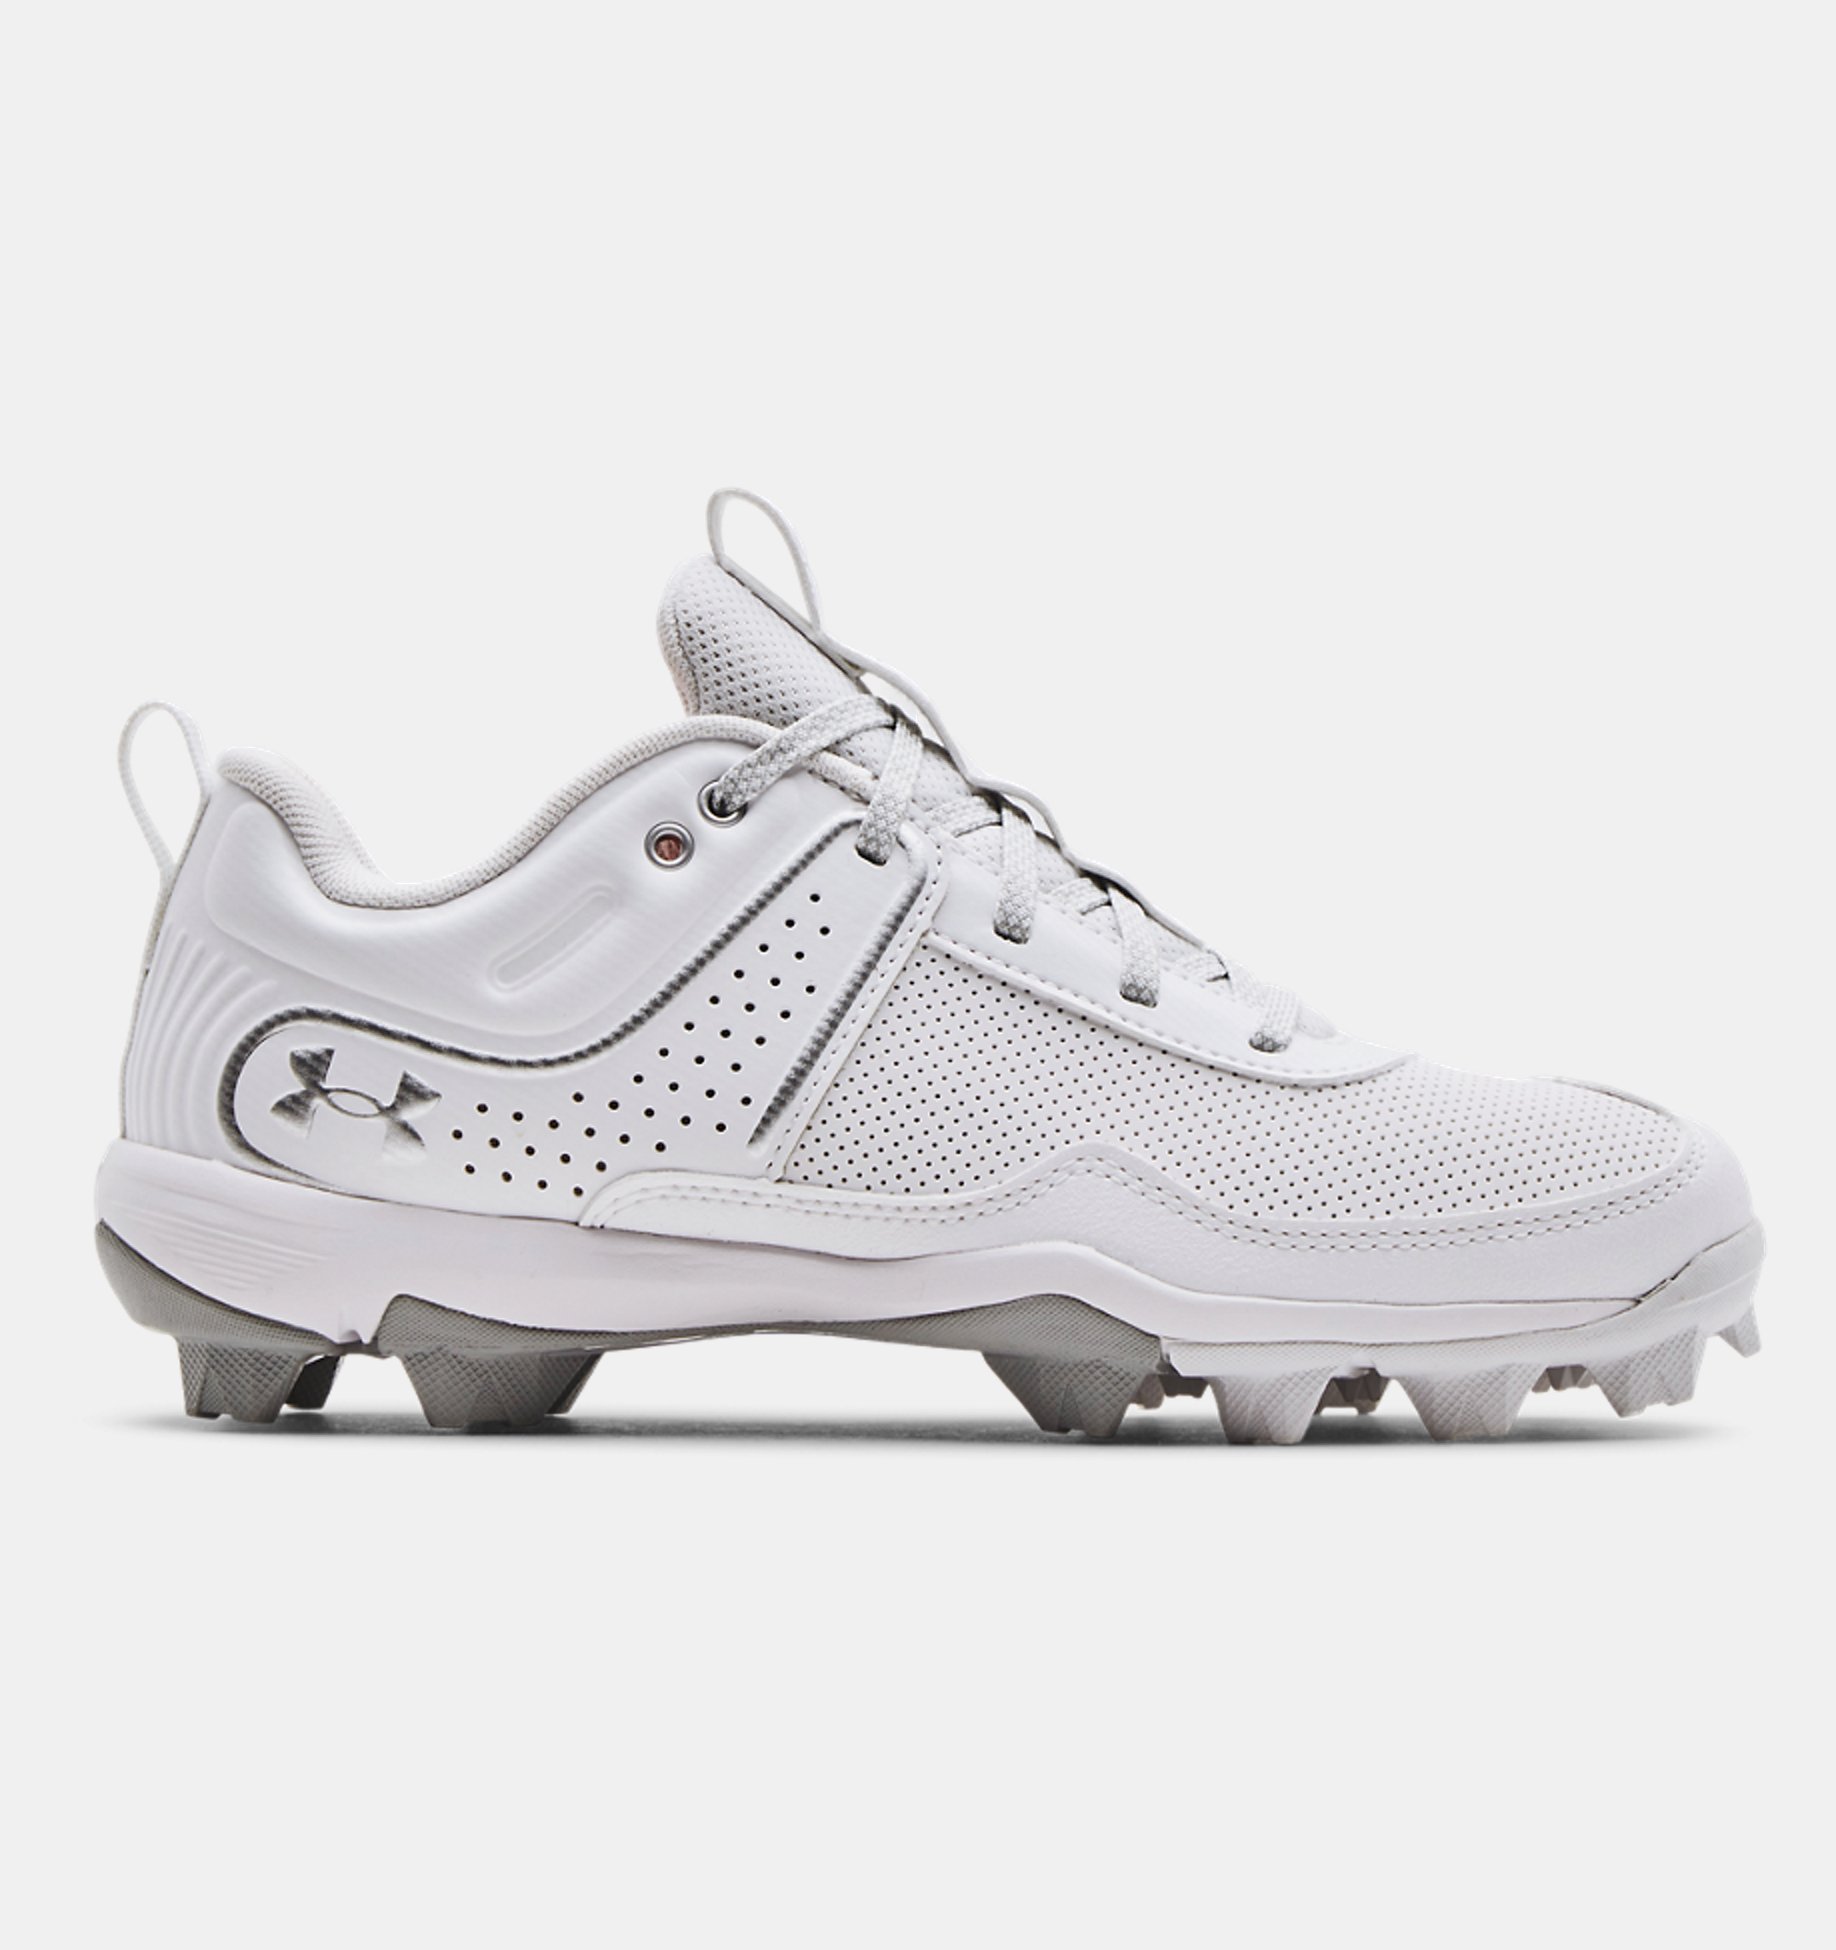 Under Armour New Glyde lV TPU CC Womens 6.5 Softball Molded Cleats Black/White